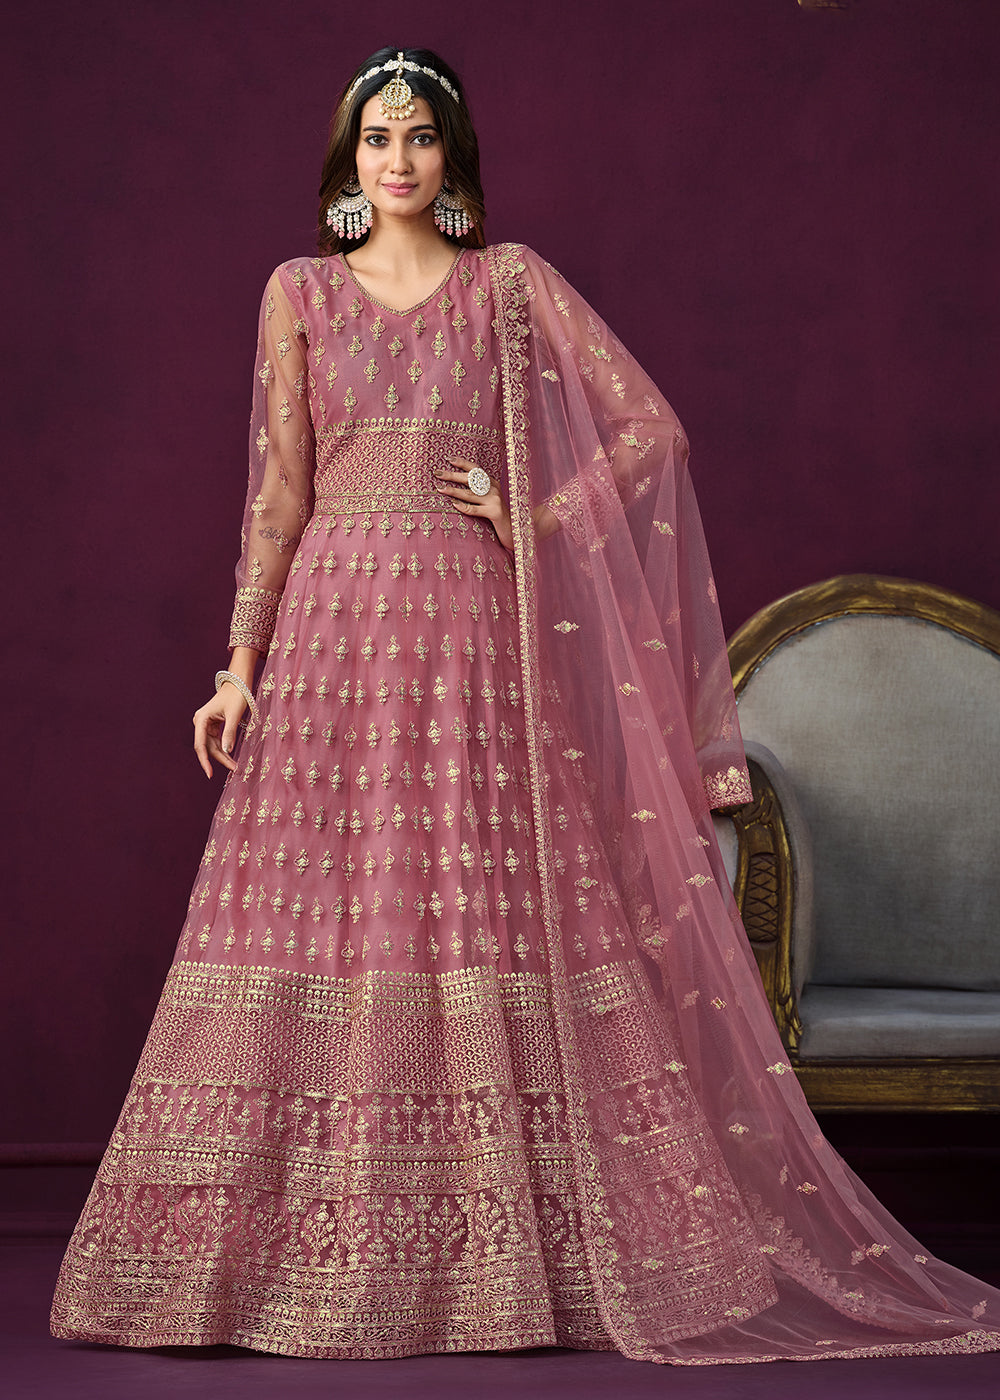 Buy Now Floor Length Pink Sequins Embroidered Wedding Anarkali Suit Online in USA, UK, Australia, New Zealand, Canada & Worldwide at Empress Clothing. 